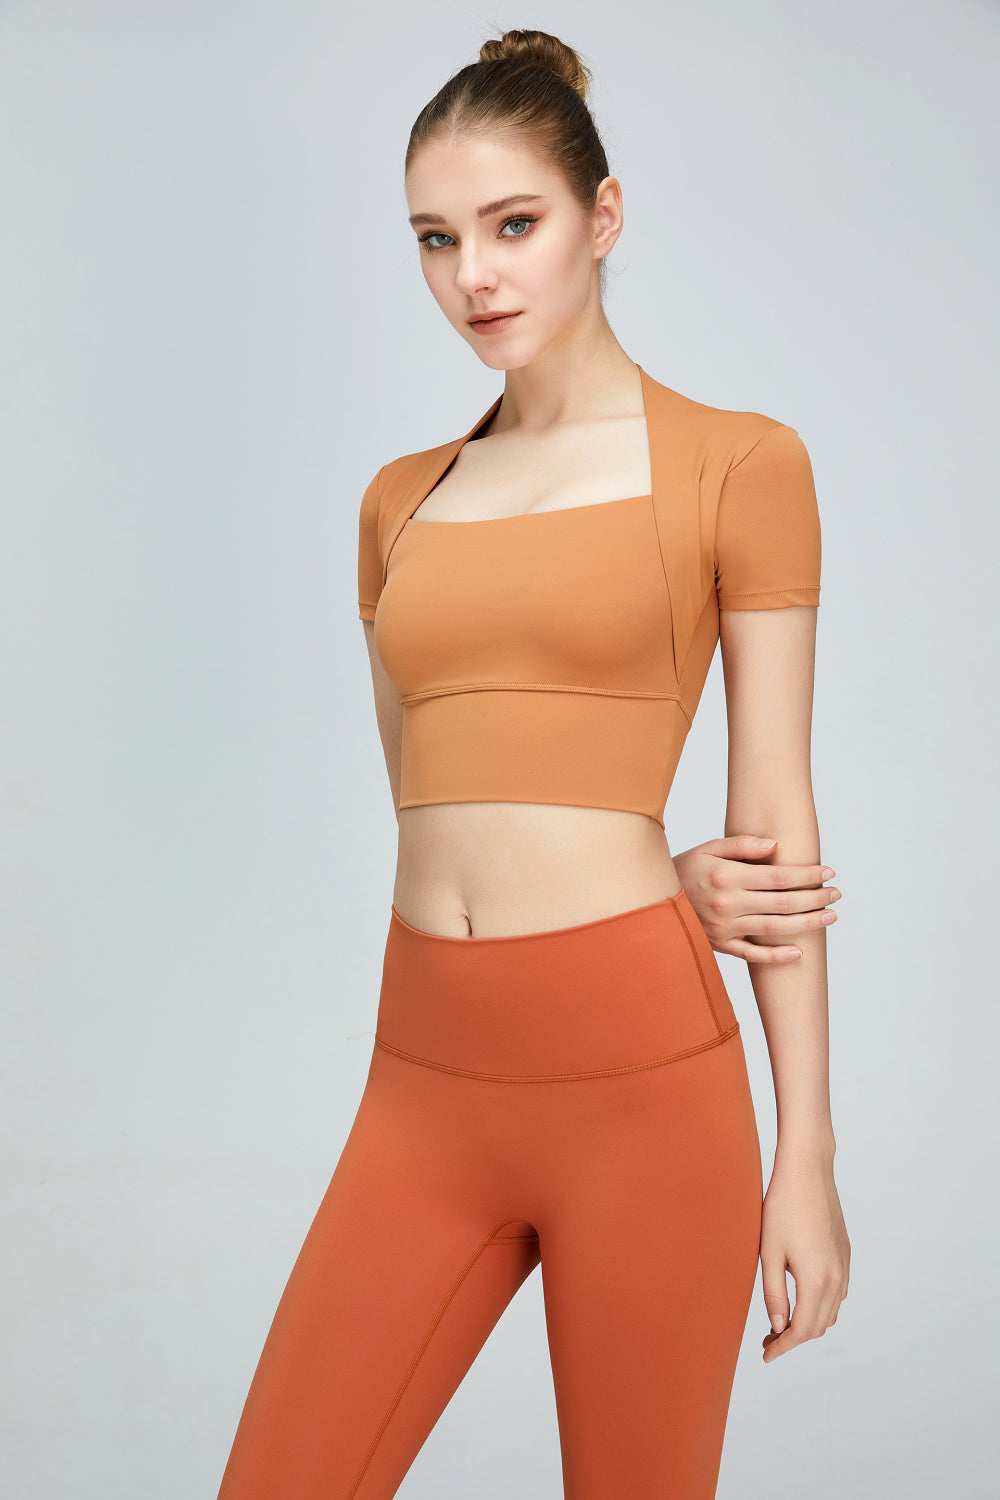 - Short Sleeve Cropped Sports Top - 5 colors - womens crop top at TFC&H Co.